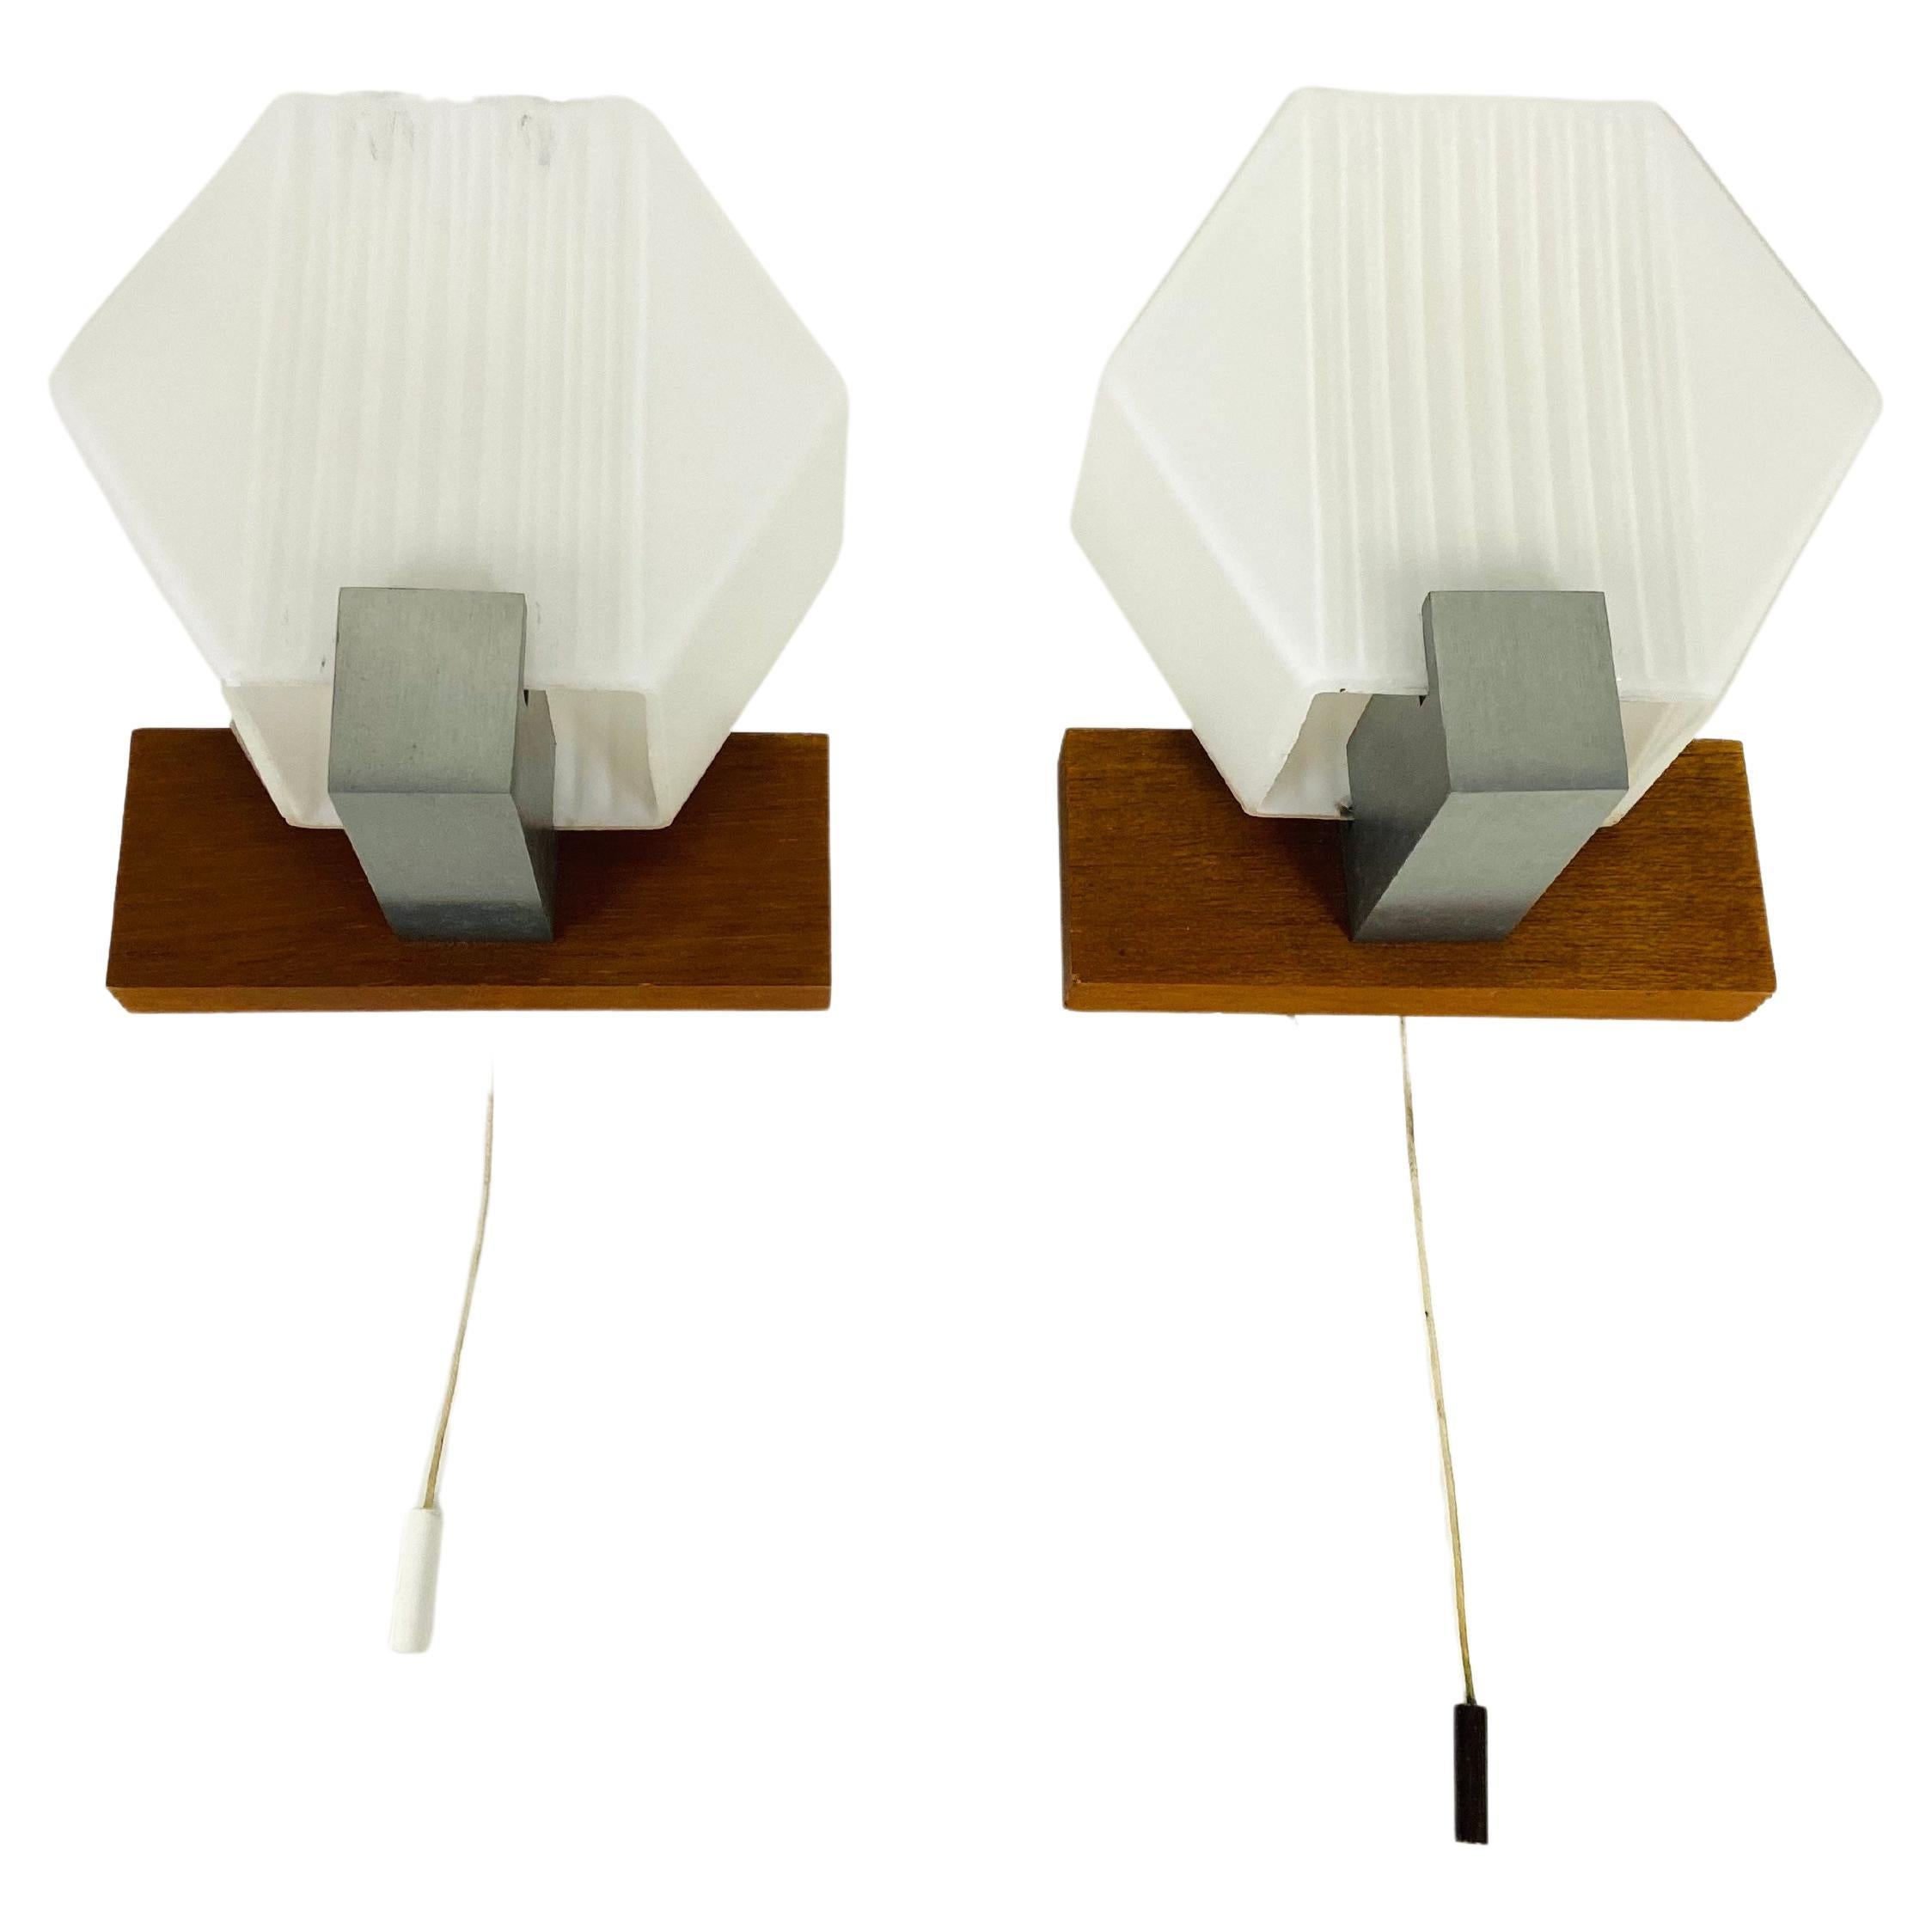 Pair of White Opal Glass and Teak Wall Lamps, 1970s, Germany For Sale